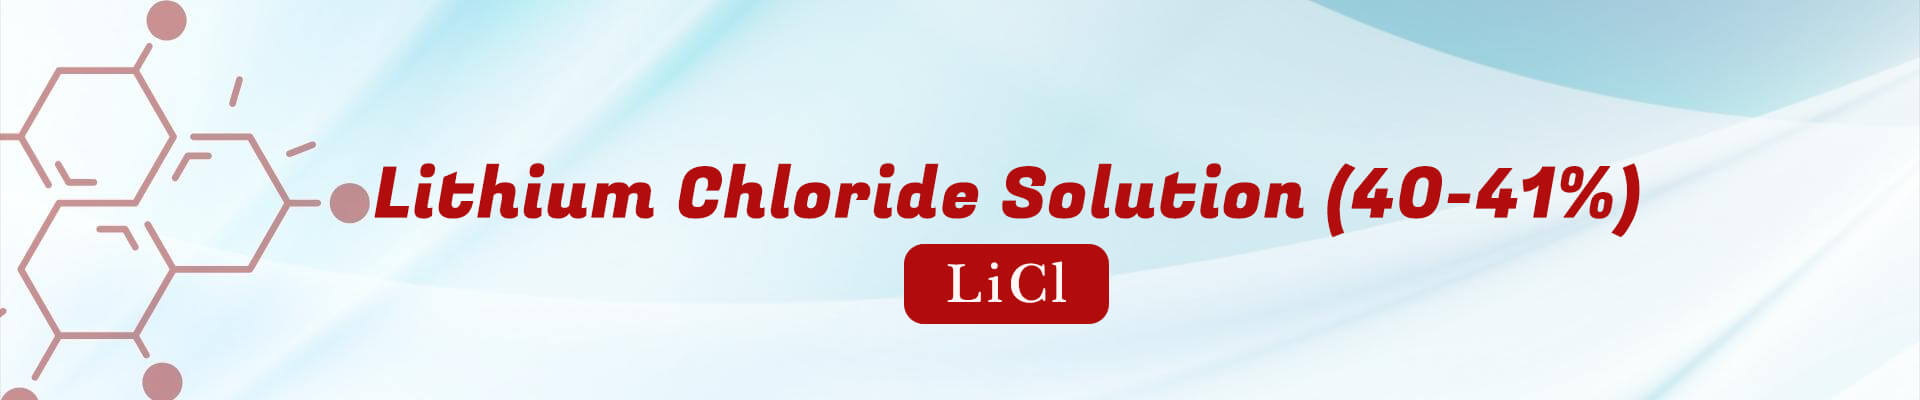 Lithium Chloride Solution ( 40 - 41% )